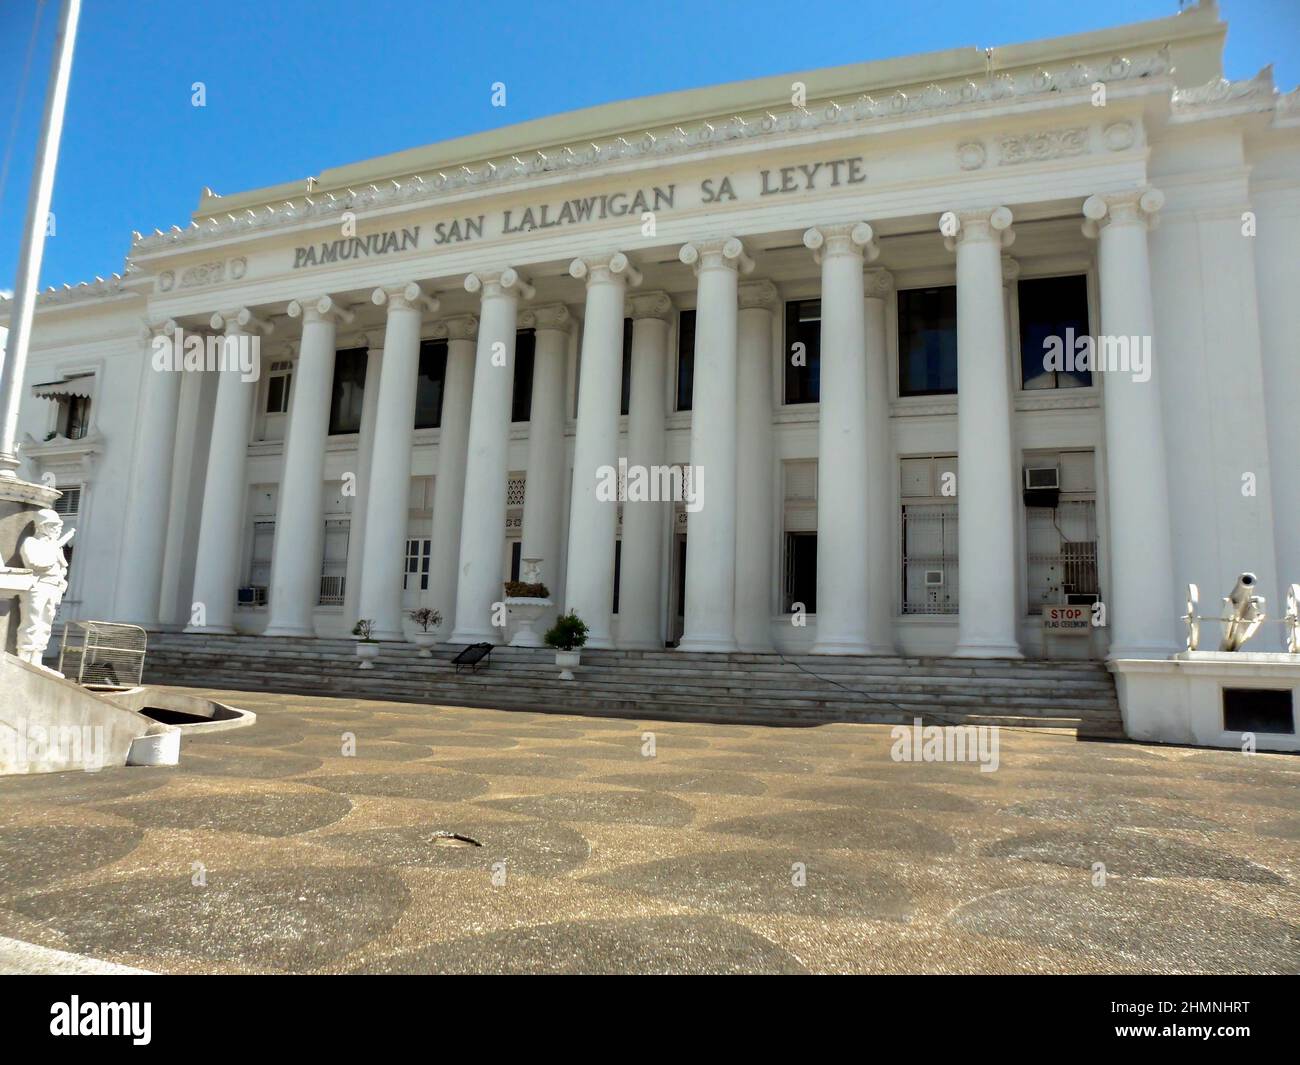 Old cultural architecture in Leyte on the Philippines January 21, 2012 Stock Photo